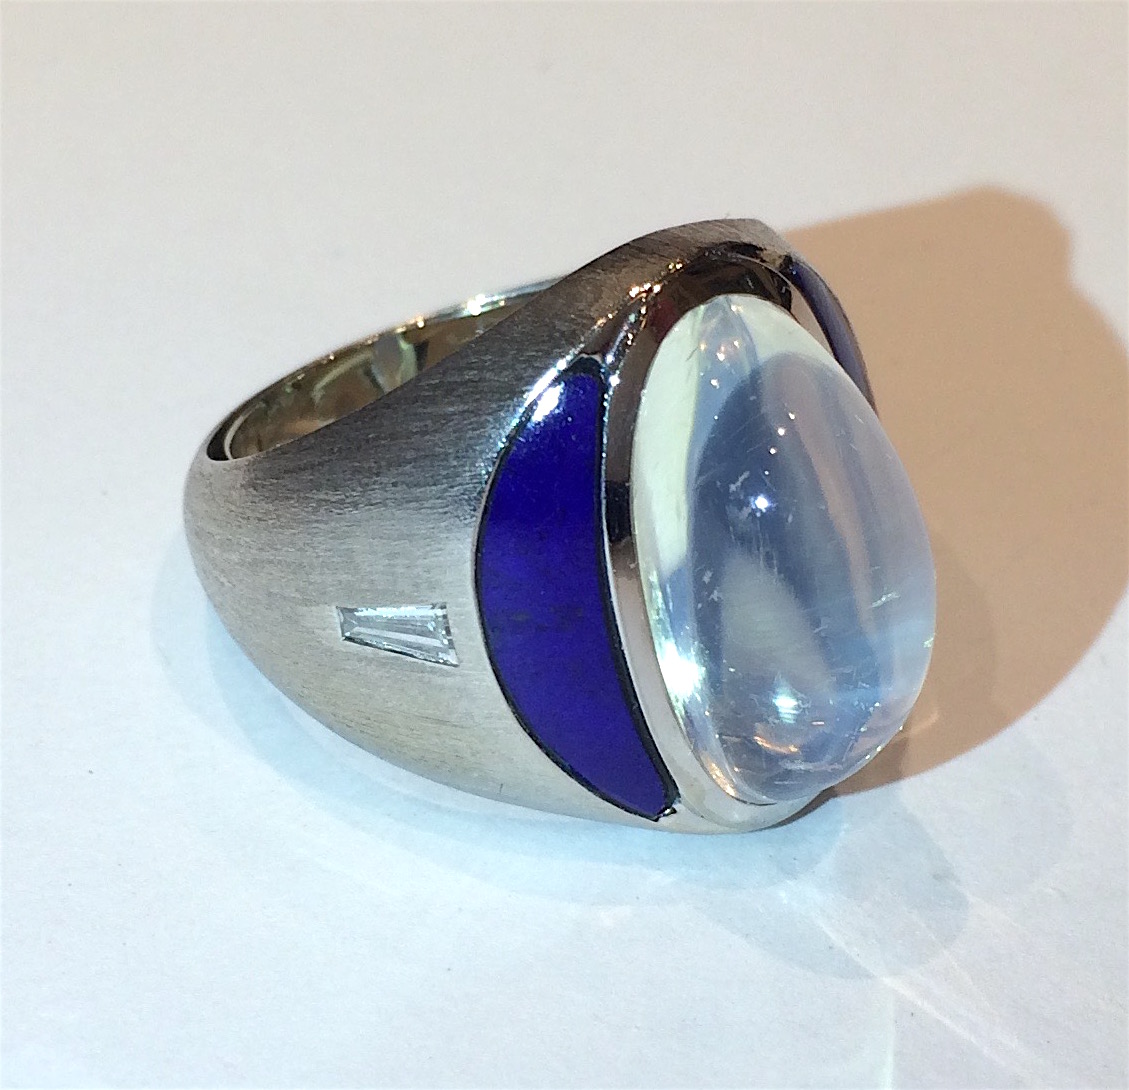 Guebelin Switzerland “Half moon” ring in 18K white brushed gold set with a large cabochon oval moonstone, two crescent moon shaped inset lapis lazuli stones and further set with two tapered baguette diamonds on either side, signed with the Guebelin cipher, 750 and Swiss, c. 1950’s